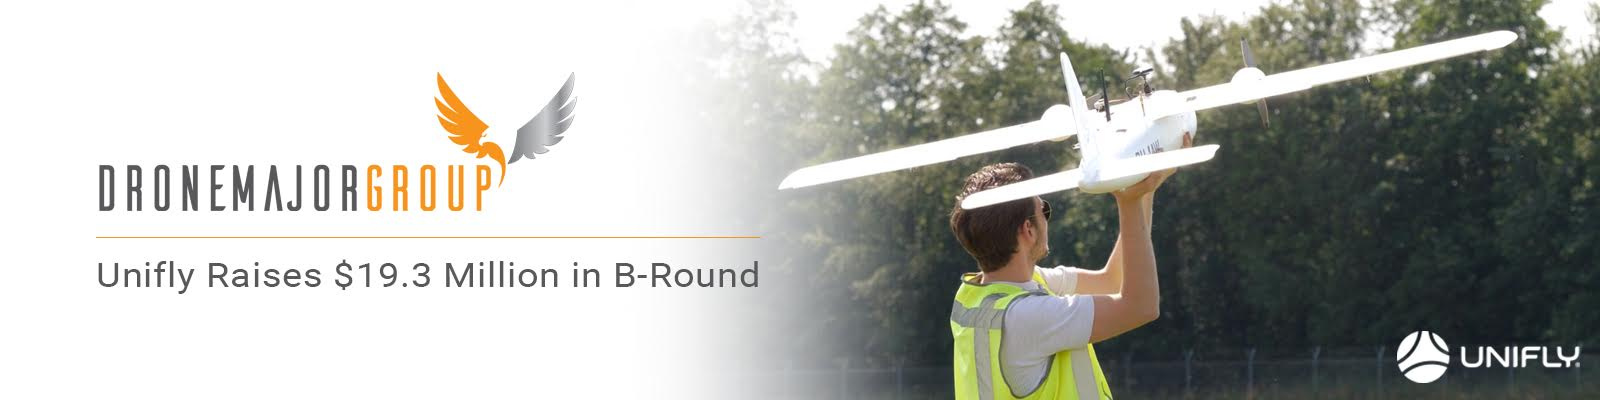 unifly b-round funding success over millions of dollars won